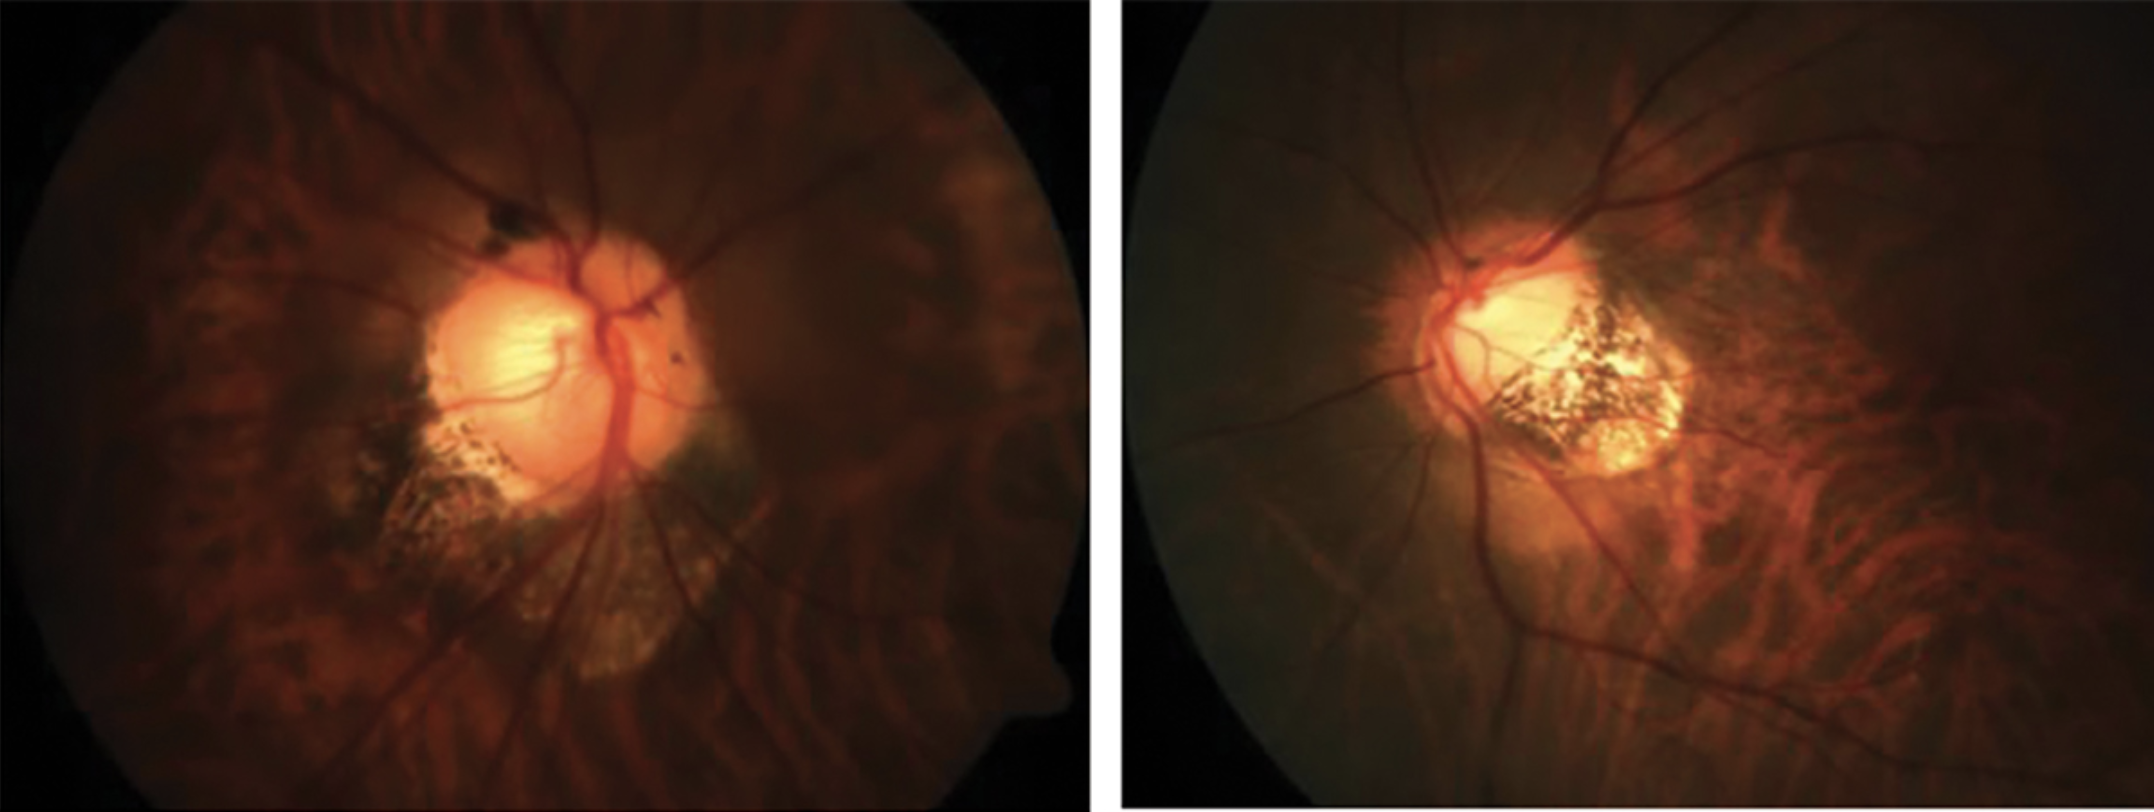 Myopic maculopathy was almost constant when posterior staphyloma (shown here) were present in this study, agreeing with prior data indicating eyes with this condition have worse visual prognosis.